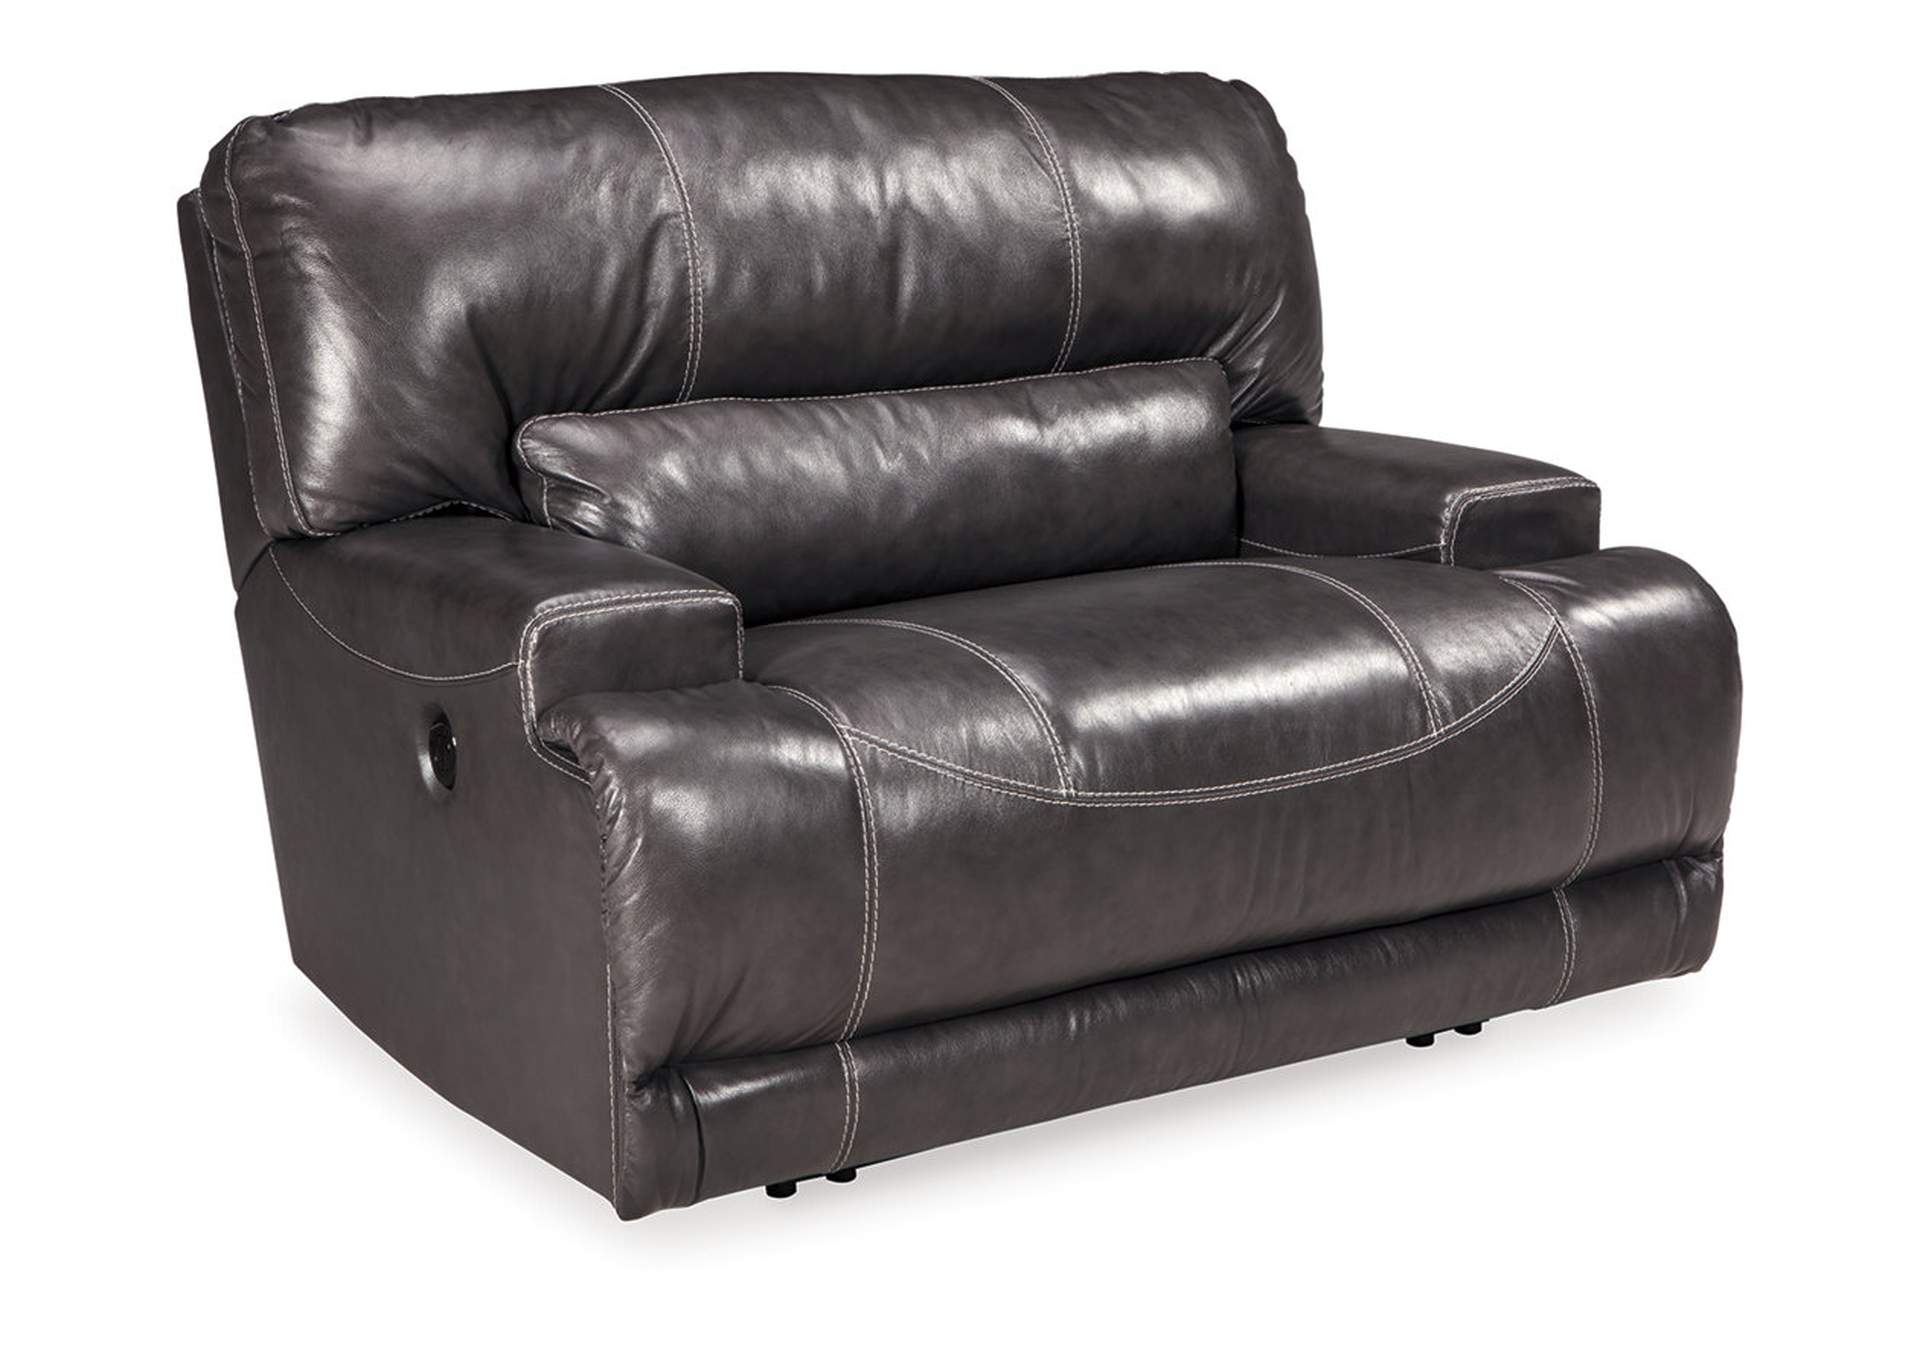 McCaskill Oversized Power Recliner,Signature Design By Ashley